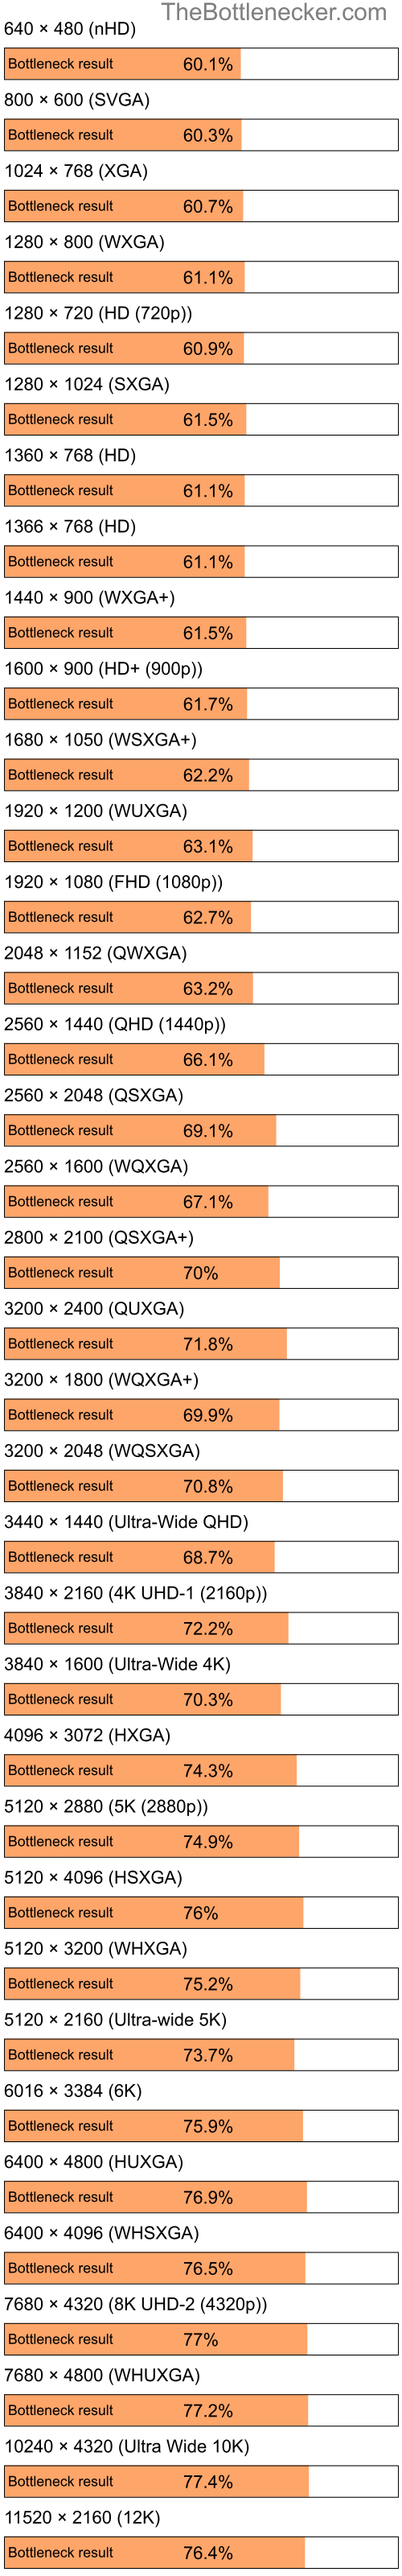 Bottleneck results by resolution for Intel Celeron M and AMD Mobility Radeon X700 in Processor Intense Tasks